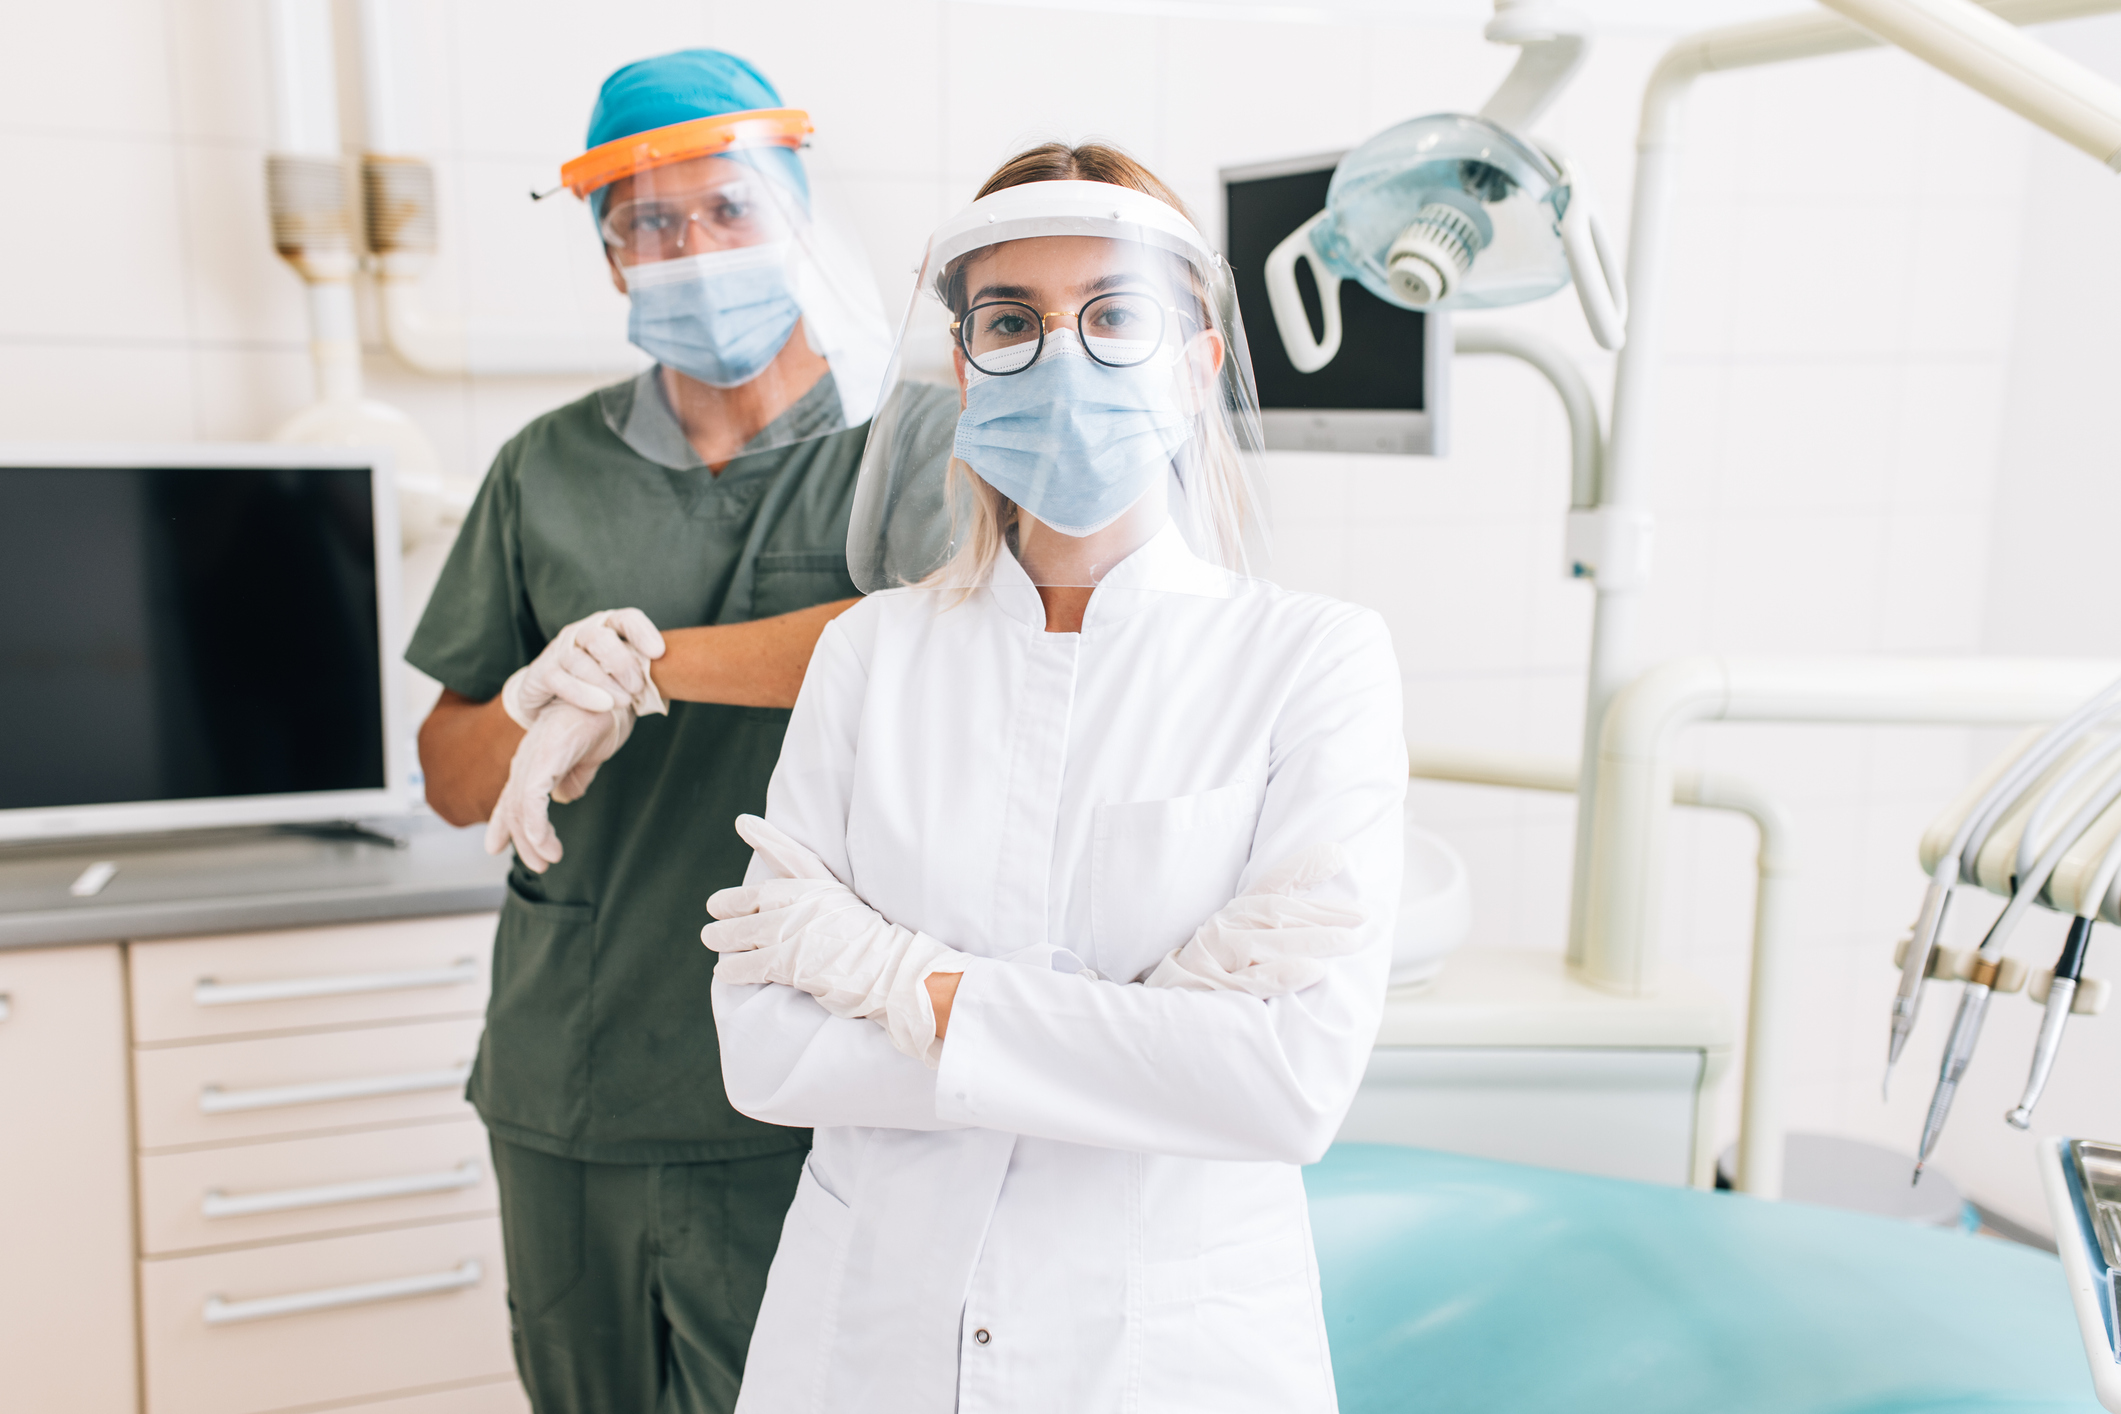 Health risks that could decrease if dentists talked to doctors